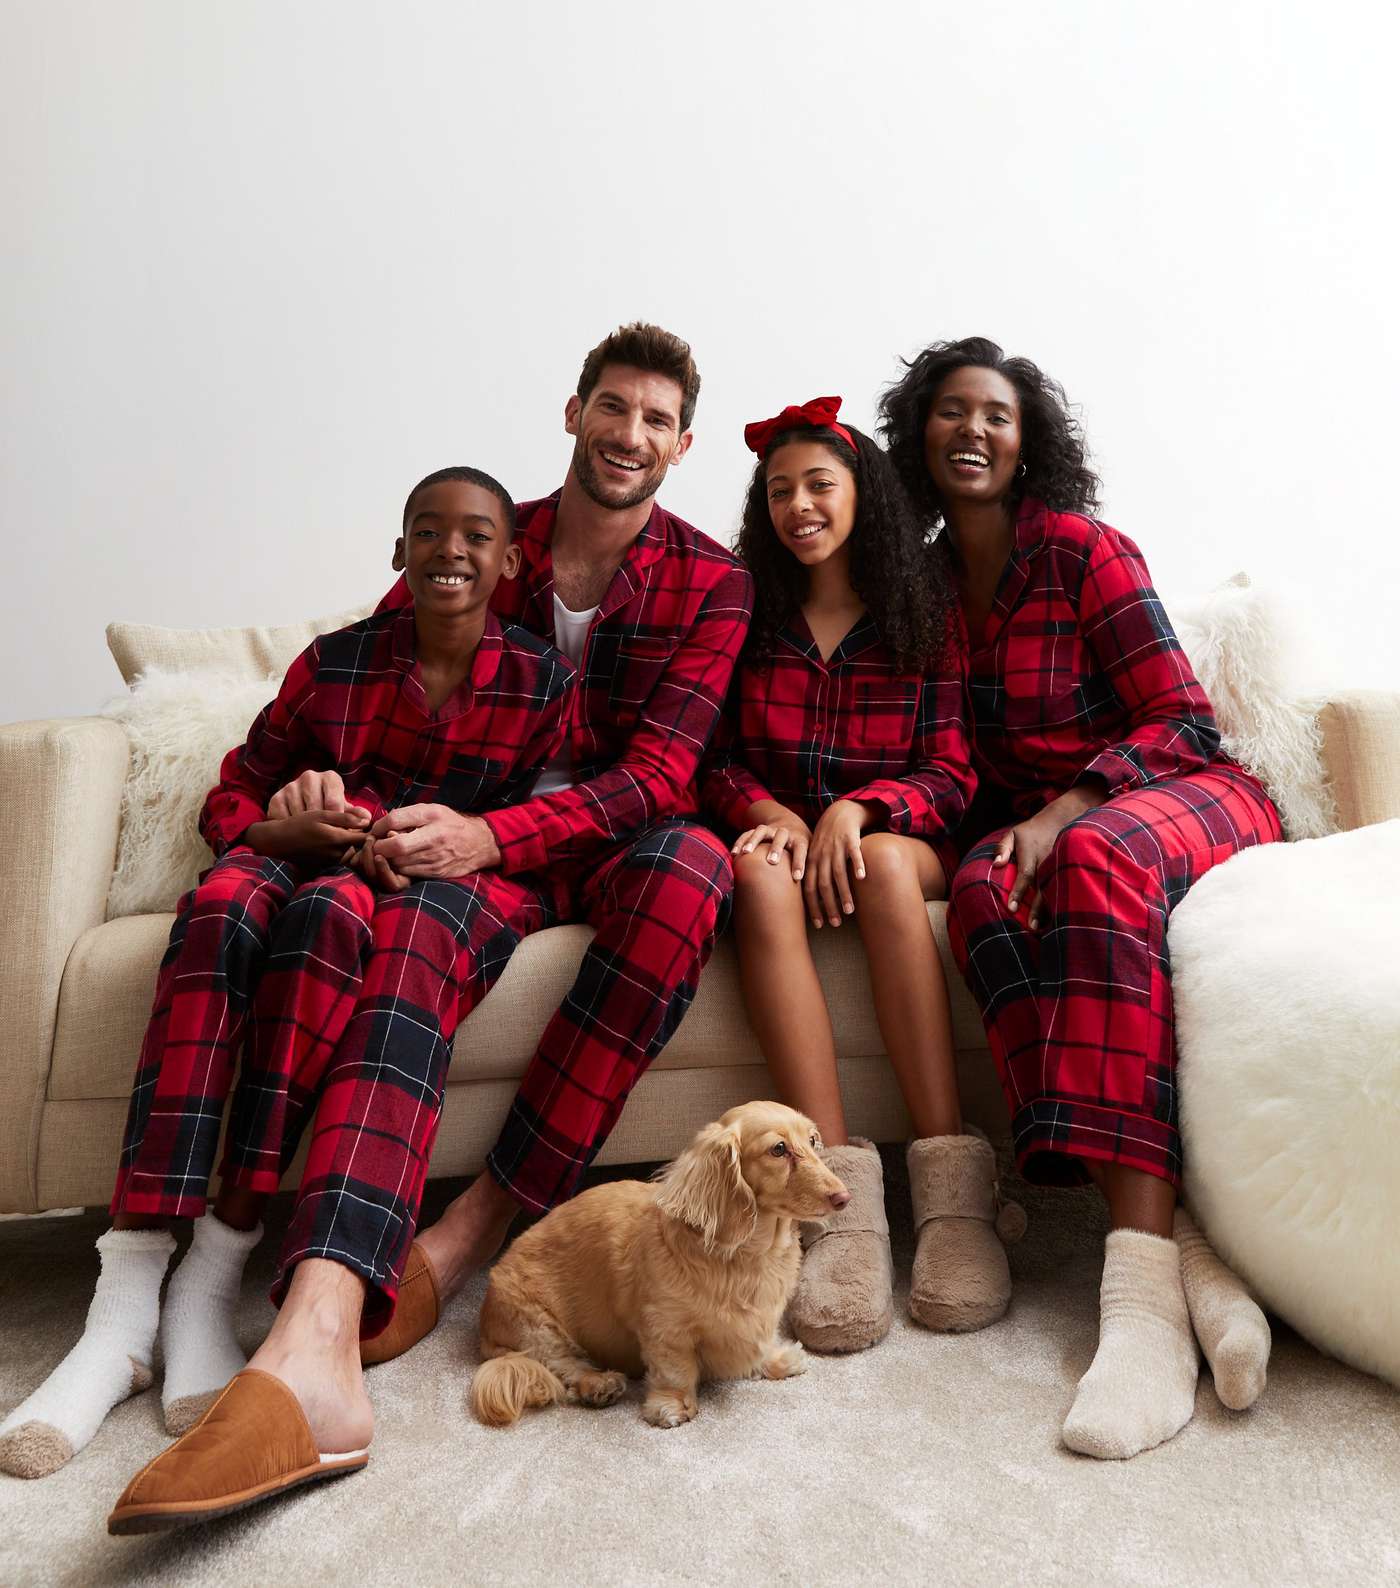 Red Cotton Trouser Family Pyjama Set with Check Print Image 2